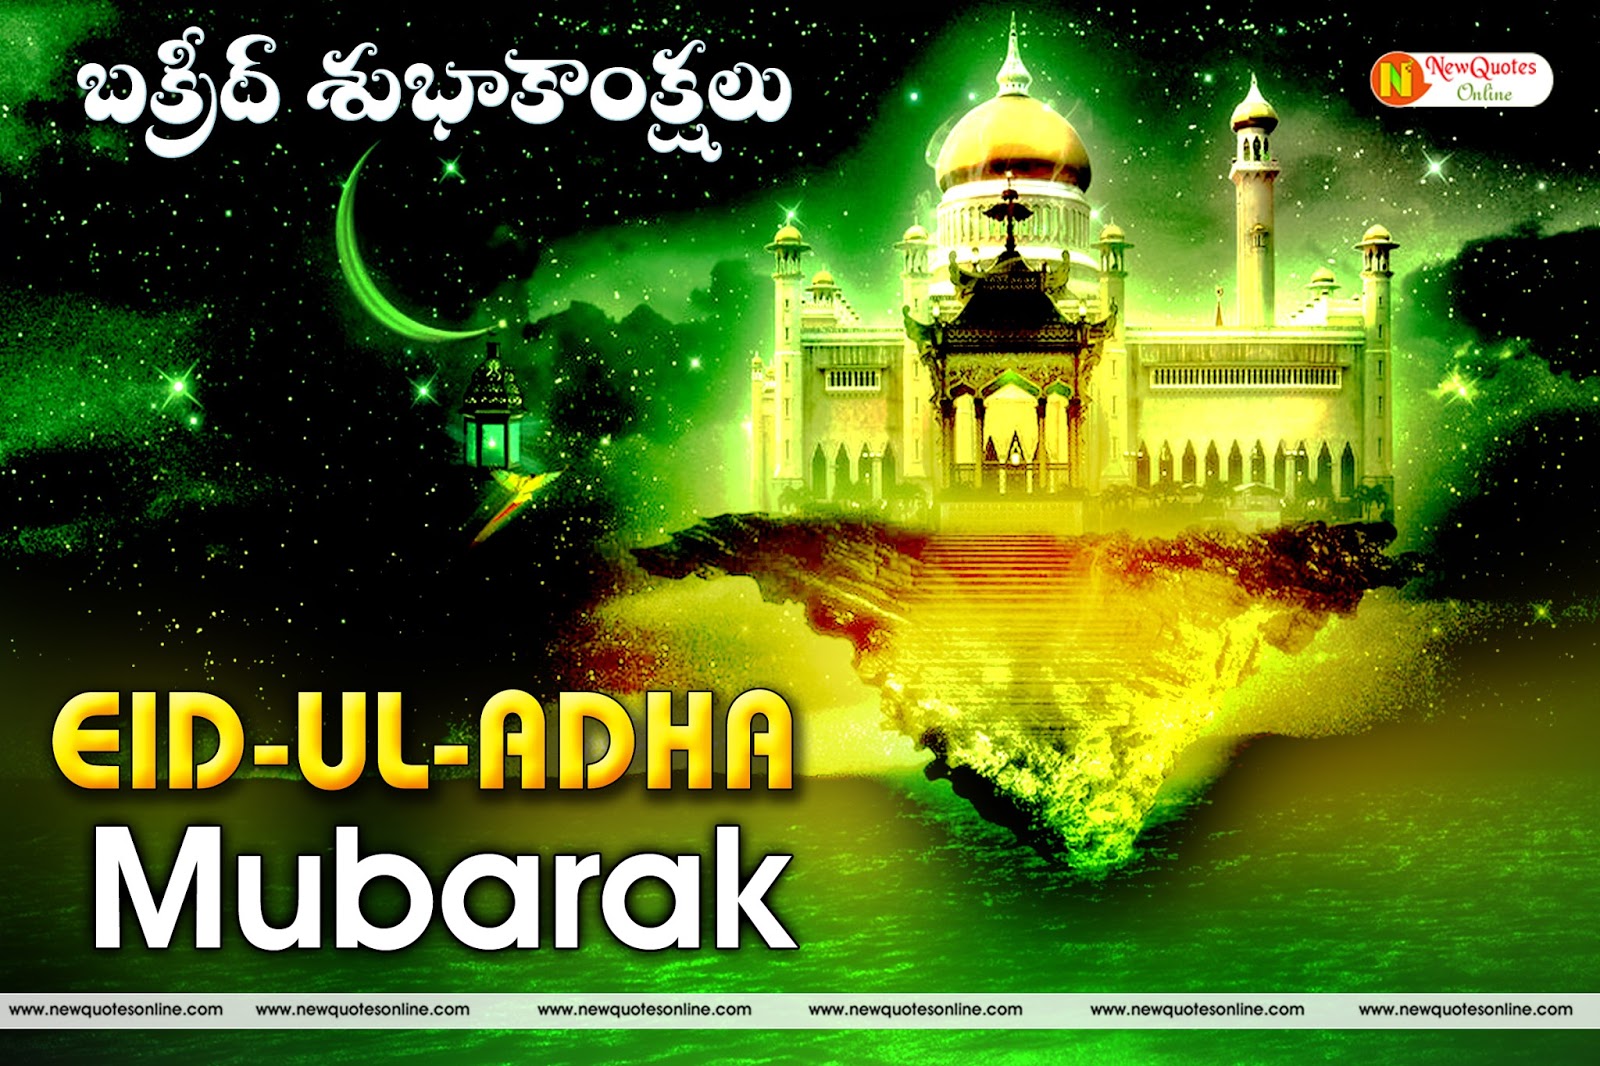 Latest Greetings Wishes Images On Bakrid Festival - New Quotes